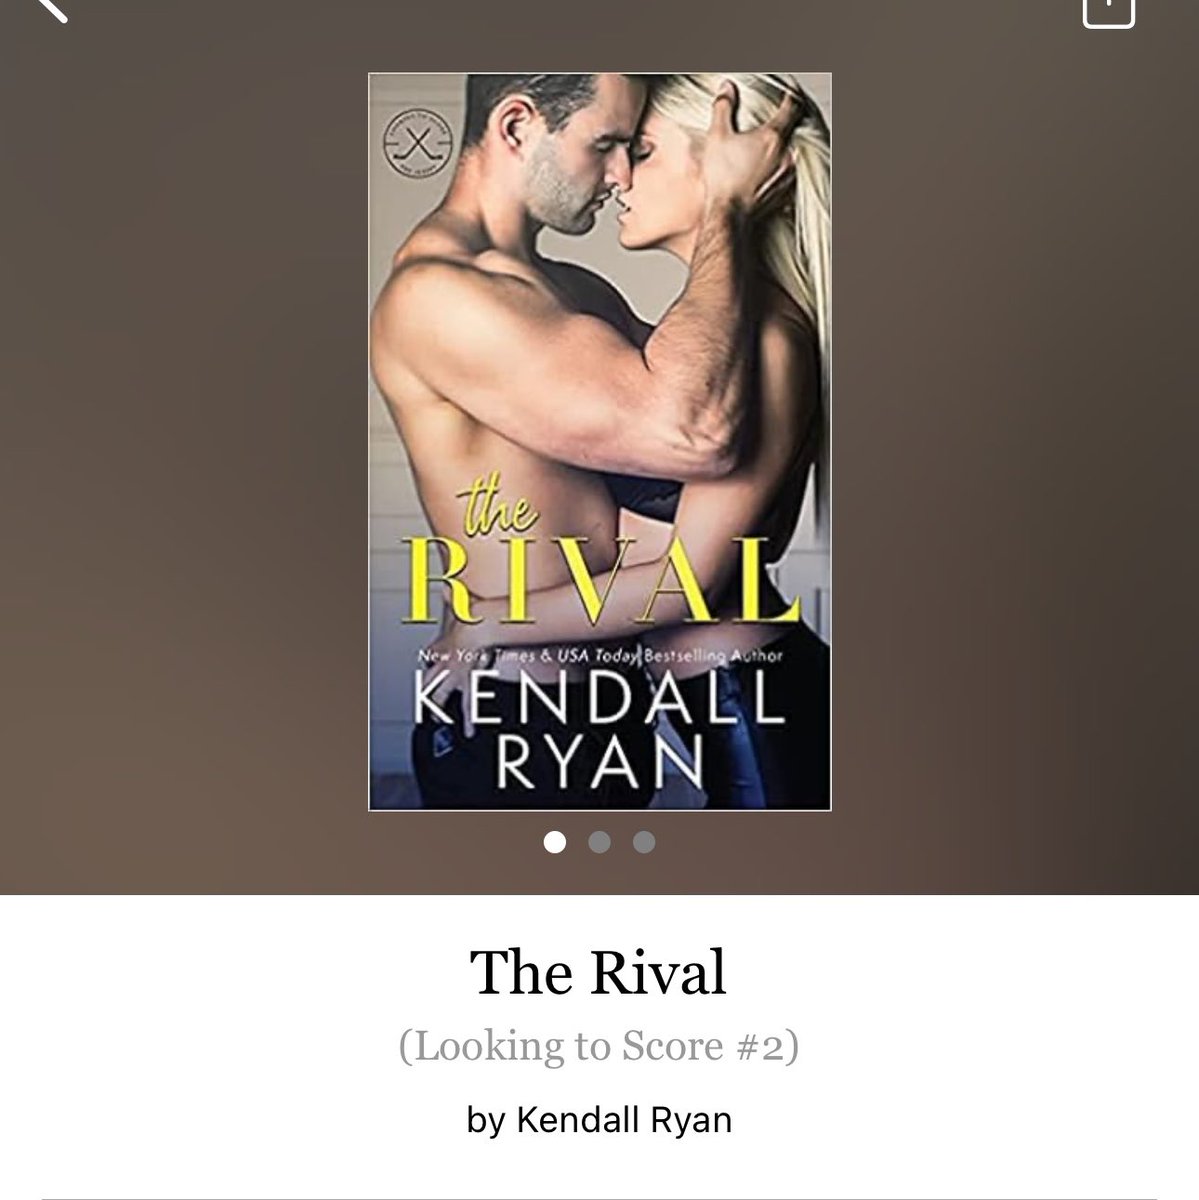 The Rival by Kendall Ryan 

#TheRival by #KendallRyan #6284 #28chapters #239pages #433of400 #Series #Audiobook #hoopla #7houraudiobook #70for18 #AlexAndAspen #Book2of4 #LookingToScoreSeries #april2024 #clearingoffreadingshelves #whatsnext #readitquick